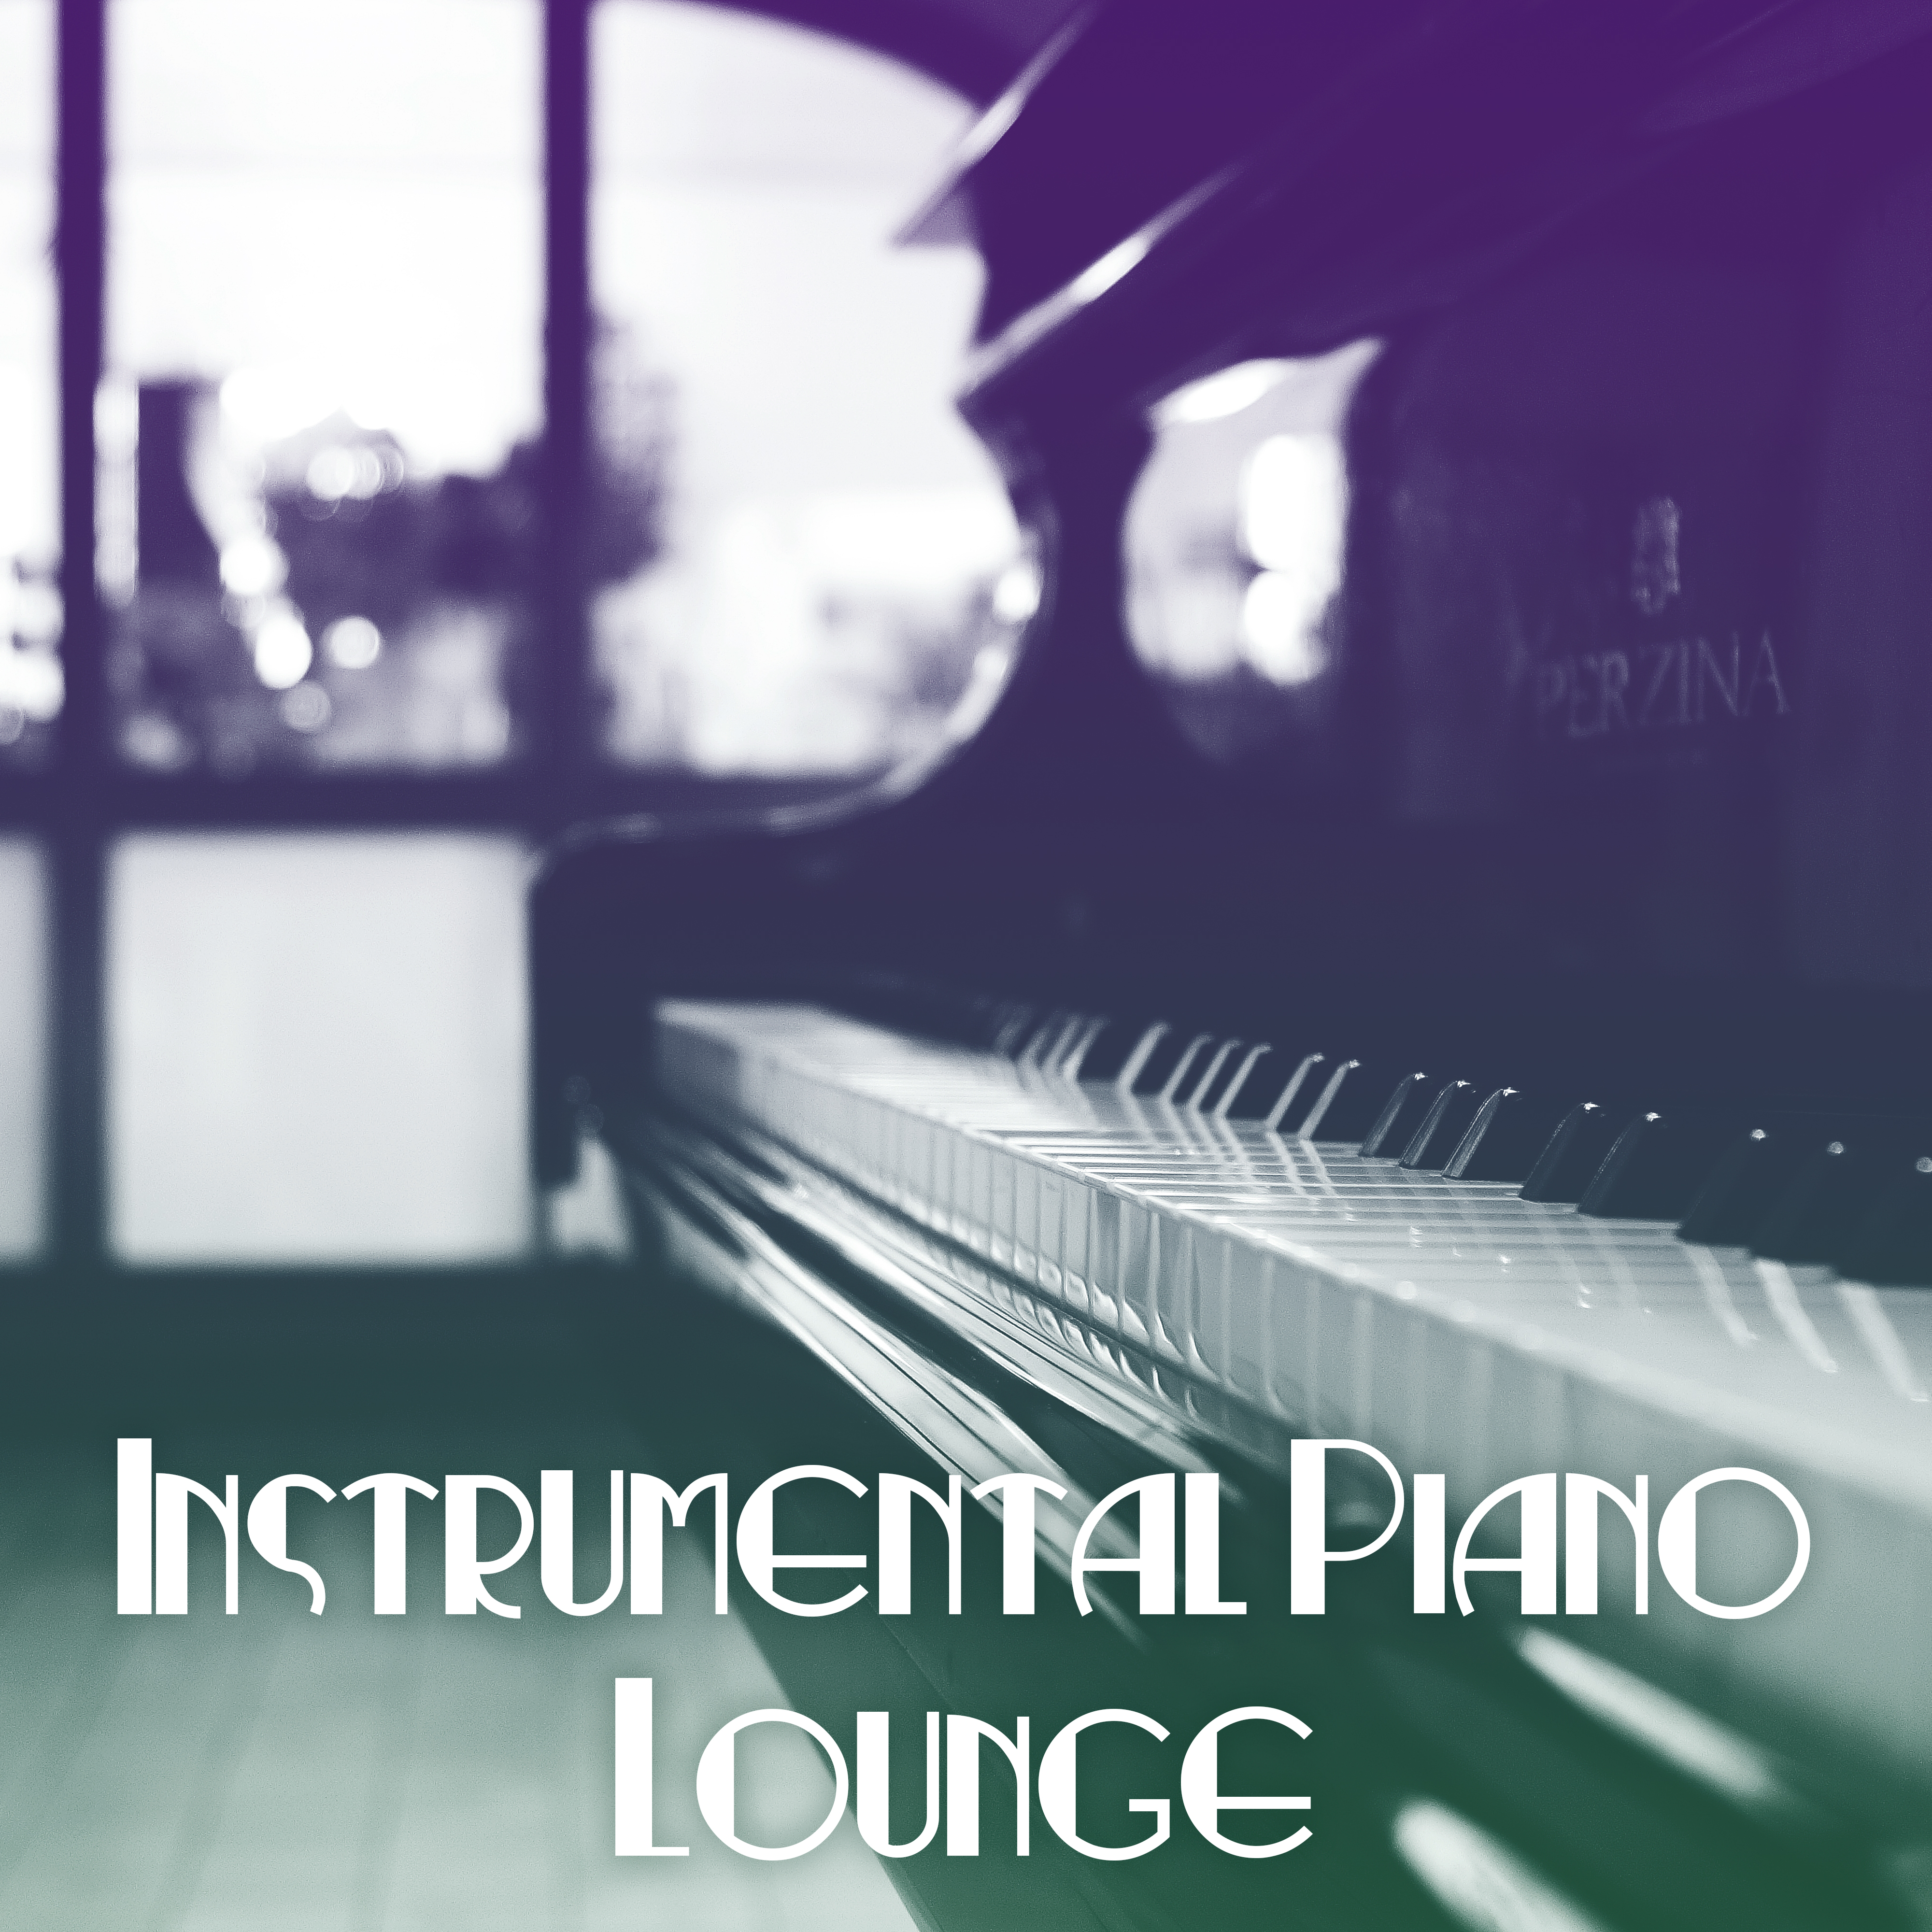 Instrumental Piano Lounge  Mellow Sounds of Jazz for Restaurant  Cafe, Jazz Club  Bar, Backround Music